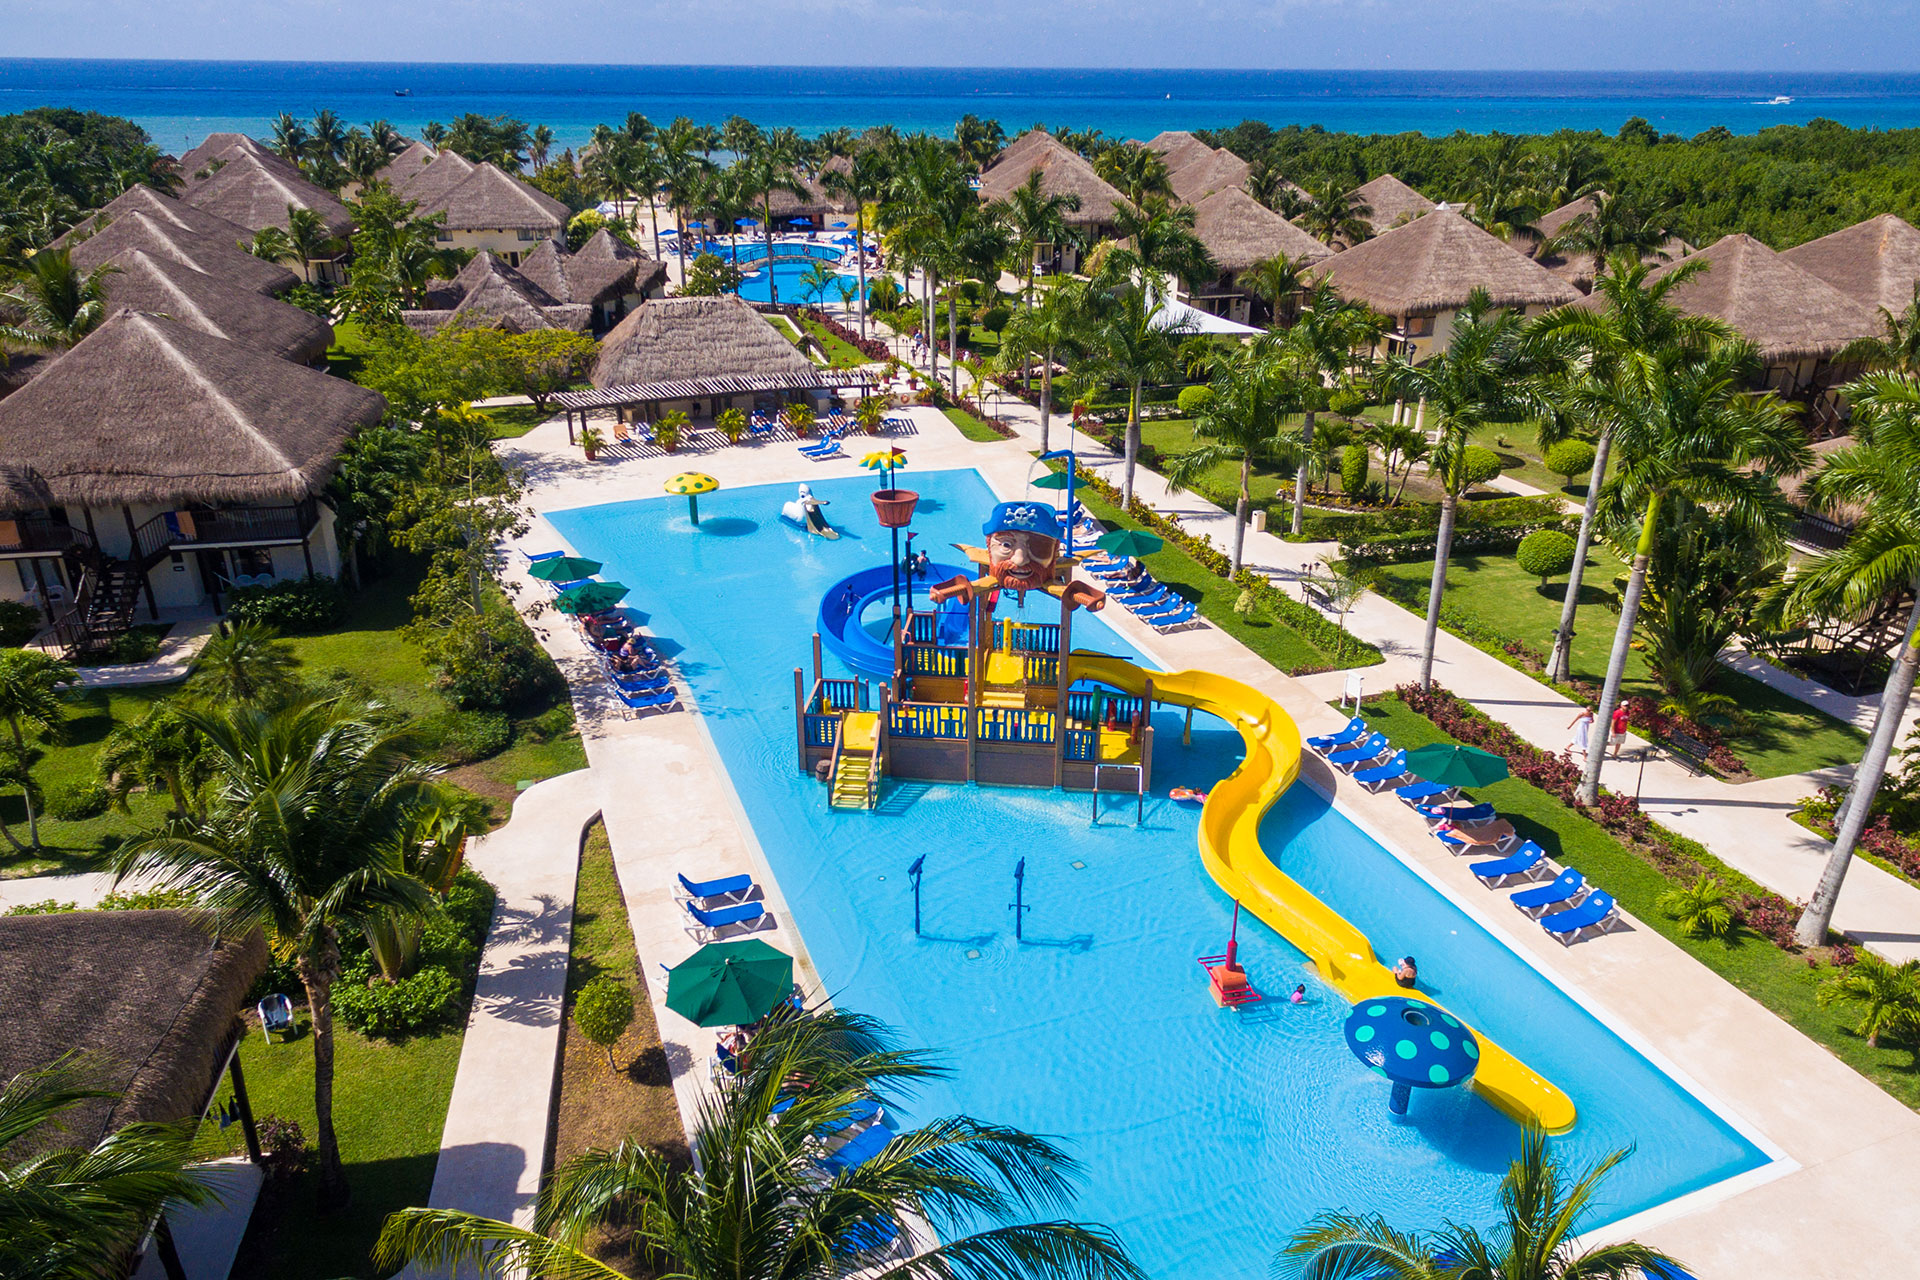 Aerial View of Pools at Allegro Cozumel; Courtesy of Allegro Cozumel